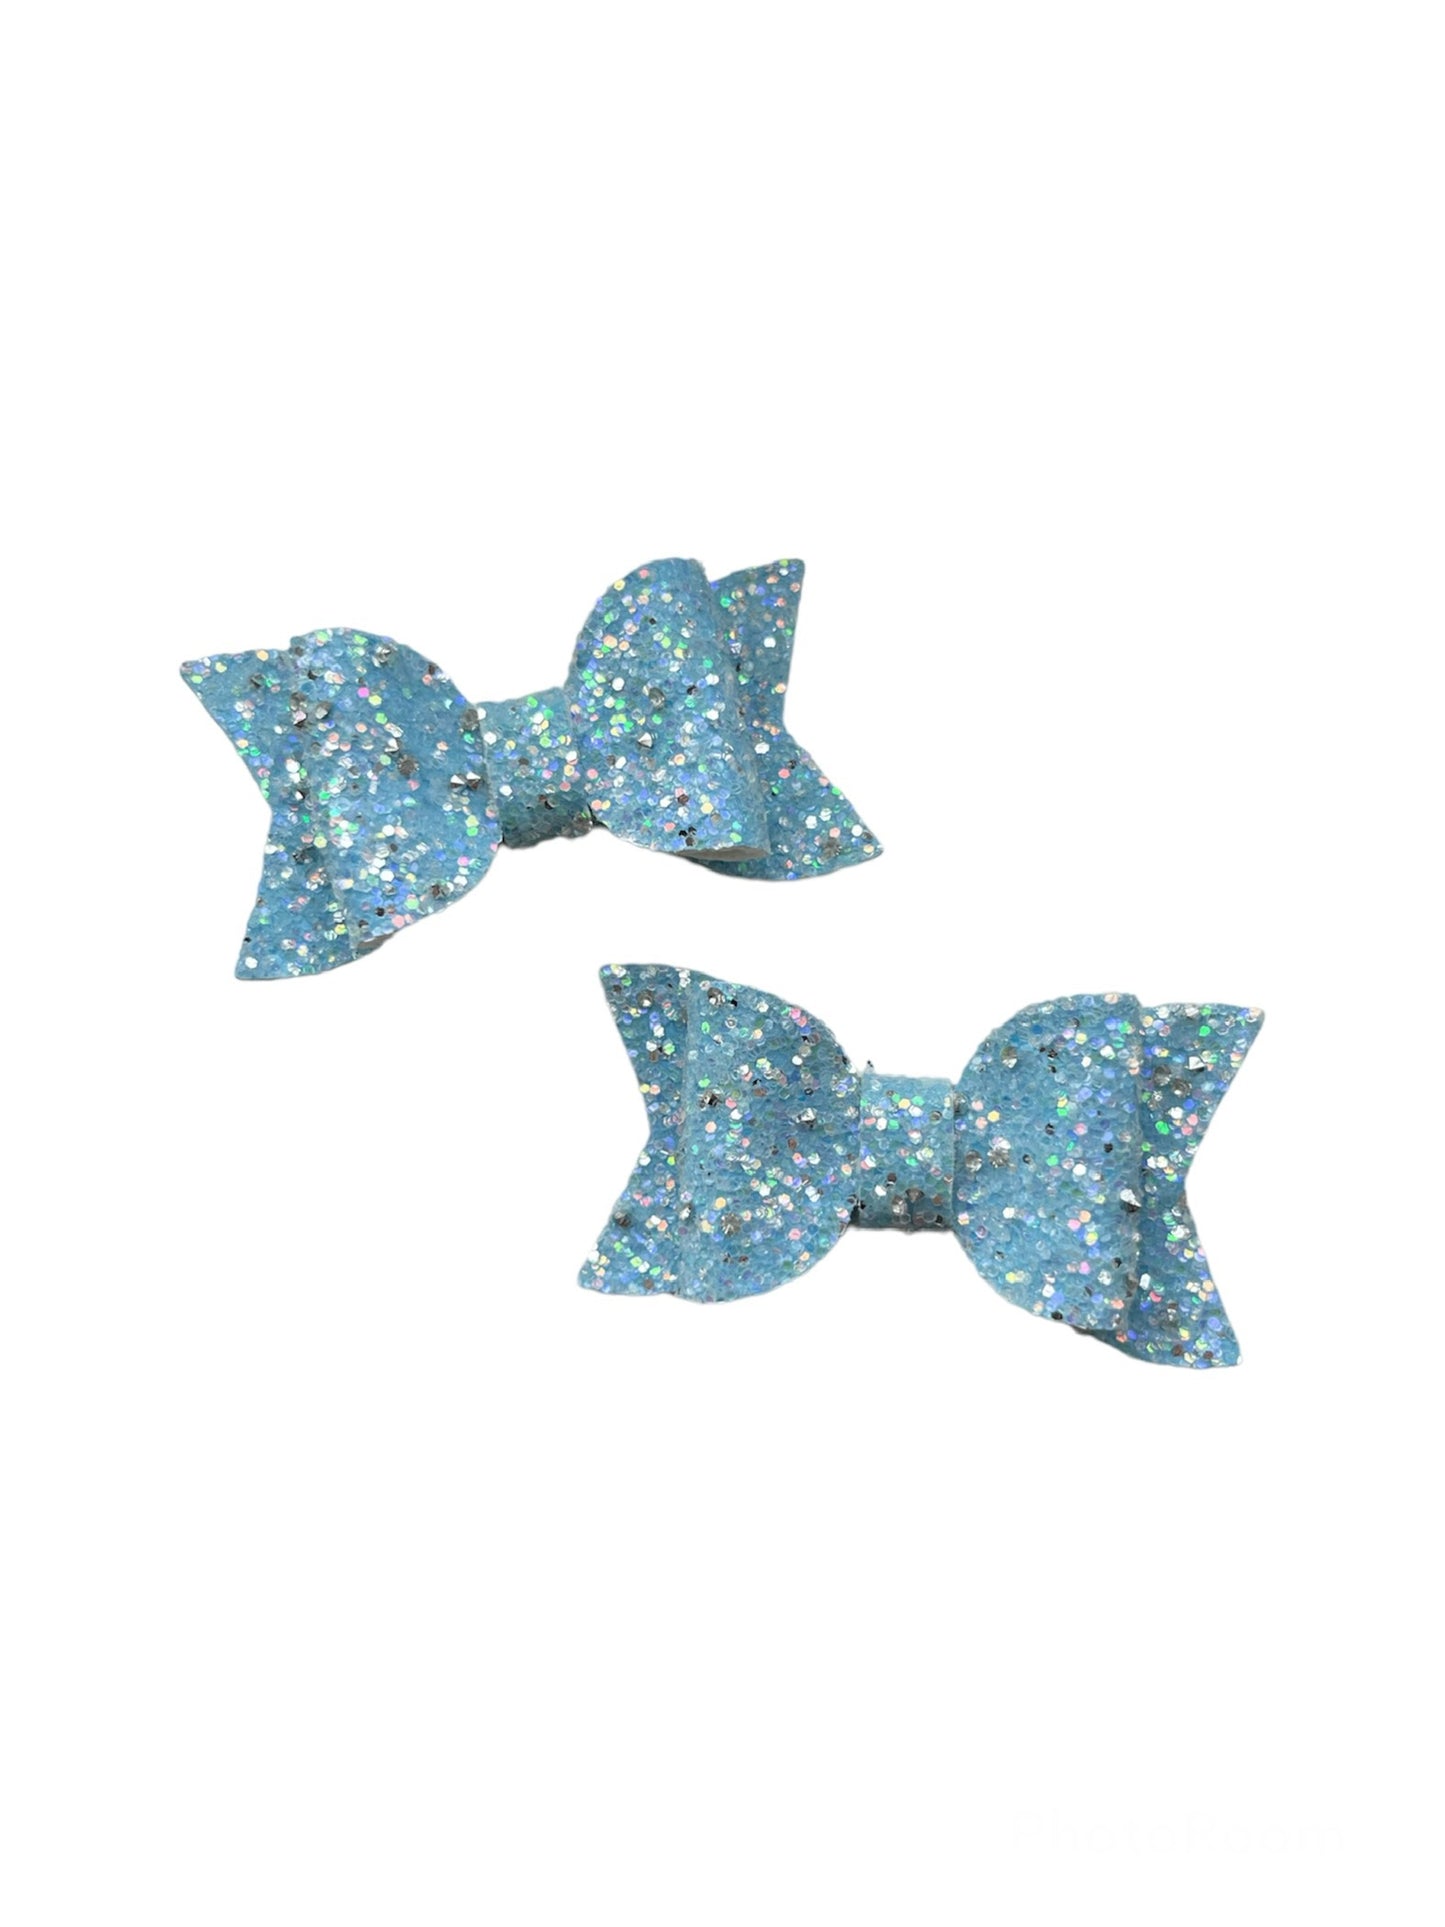 Blue Glitter Pigtail Bows!